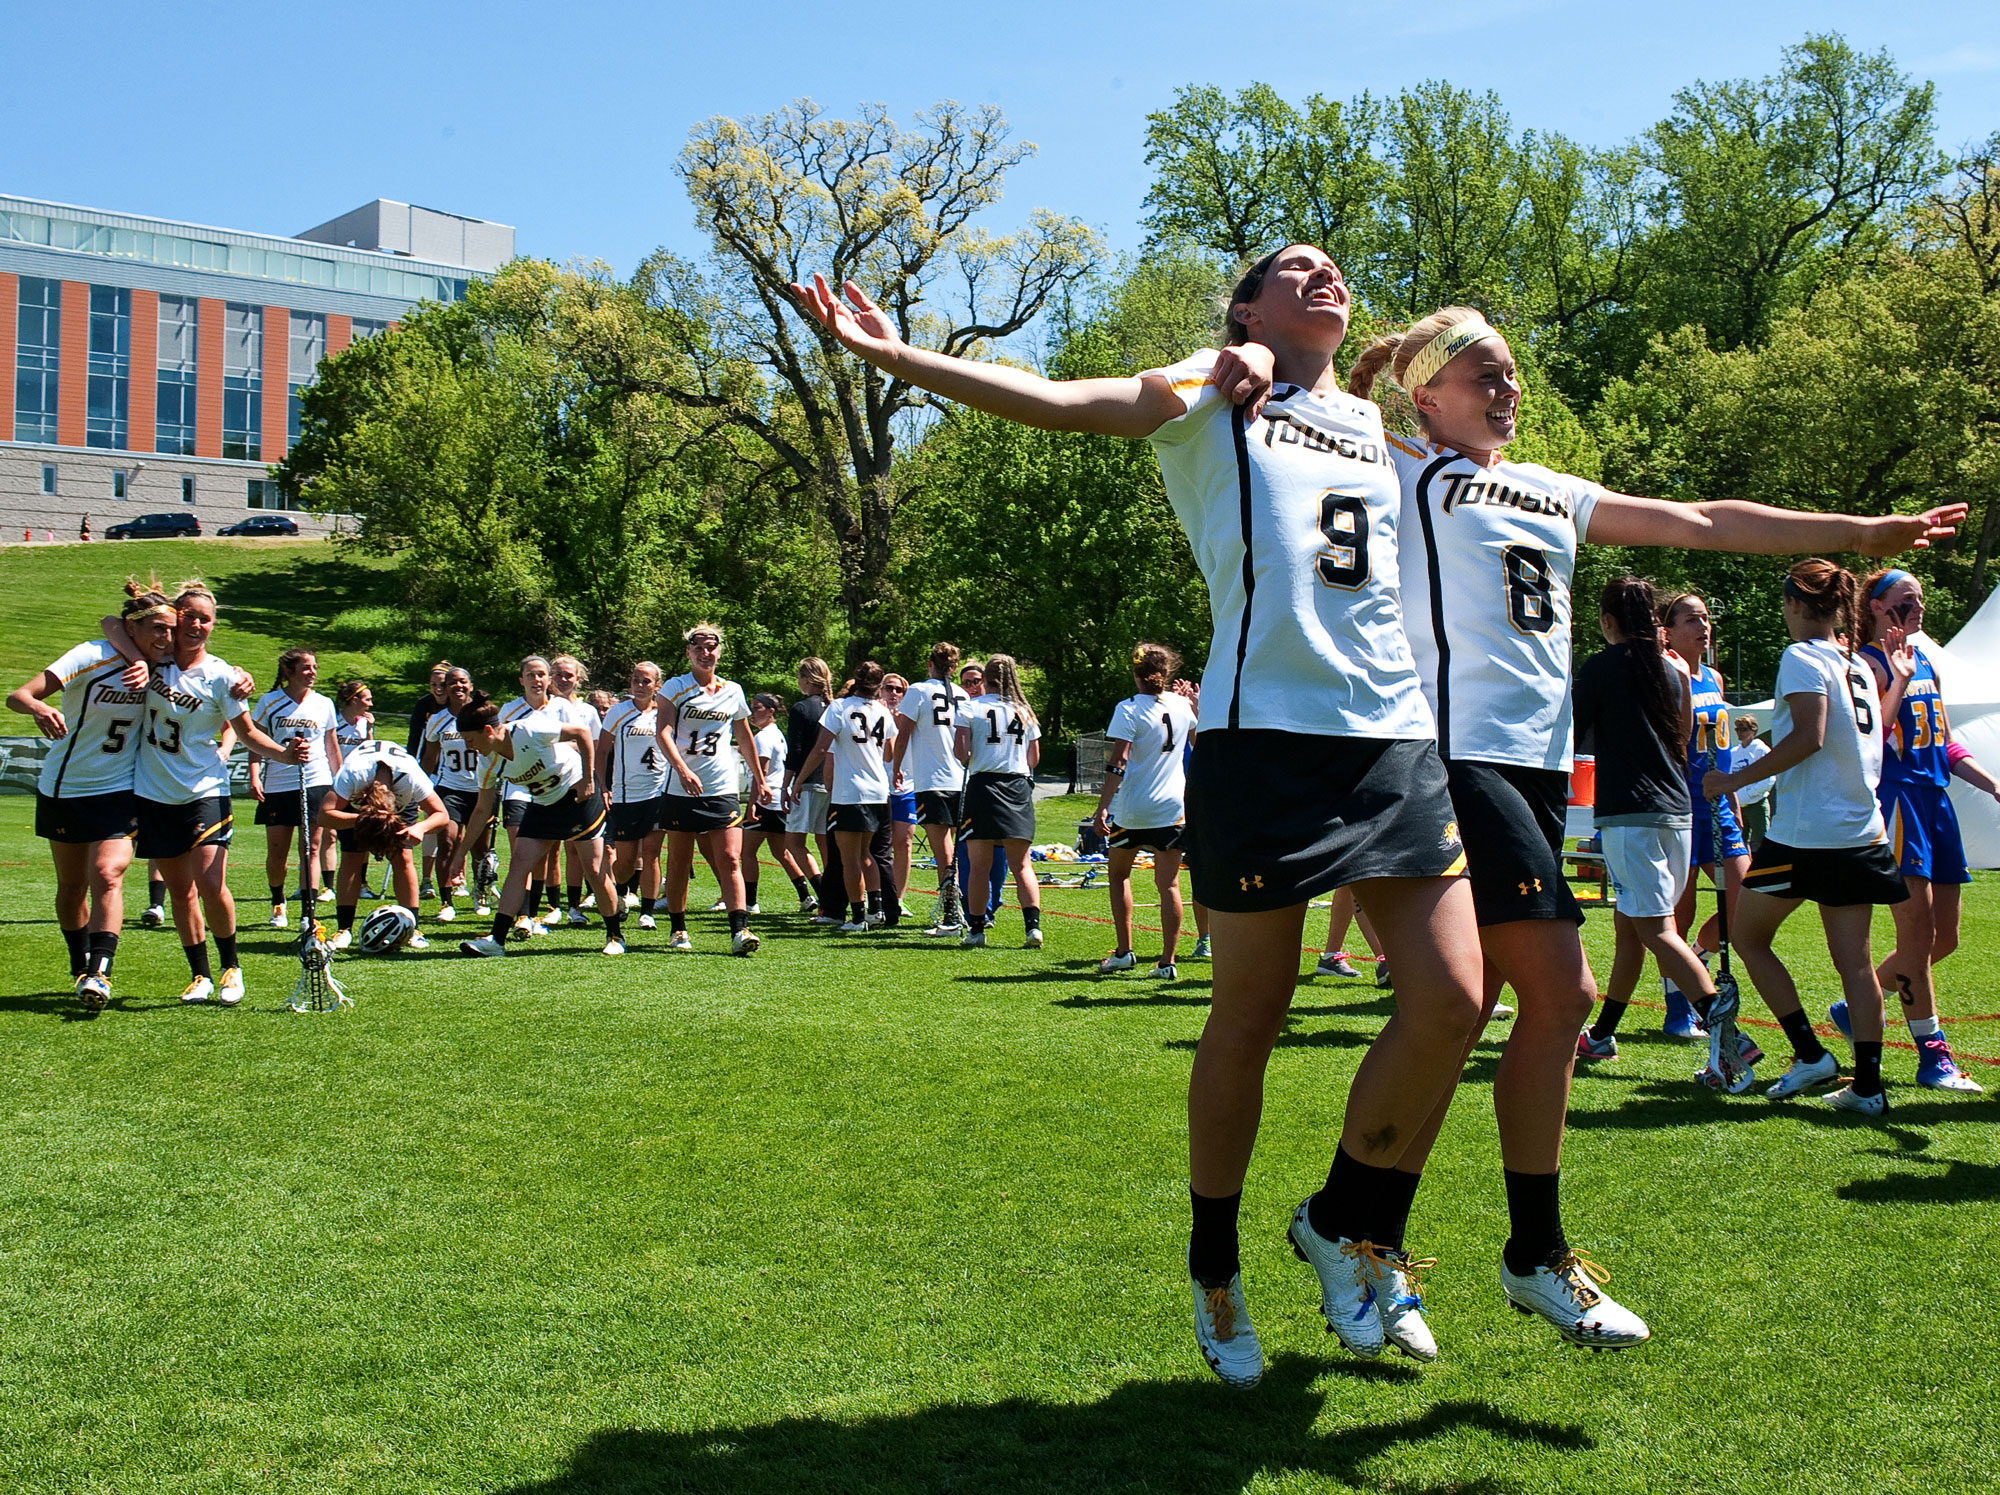  Ashley&nbsp;Waldron, left of Towson University celebrates with&nbsp;her teammate&nbsp;Sarah&nbsp;Maloof&nbsp;after winning the CAA Championship game at Towson University in Baltimore, Maryland on&nbsp;May 5th, 2013. 